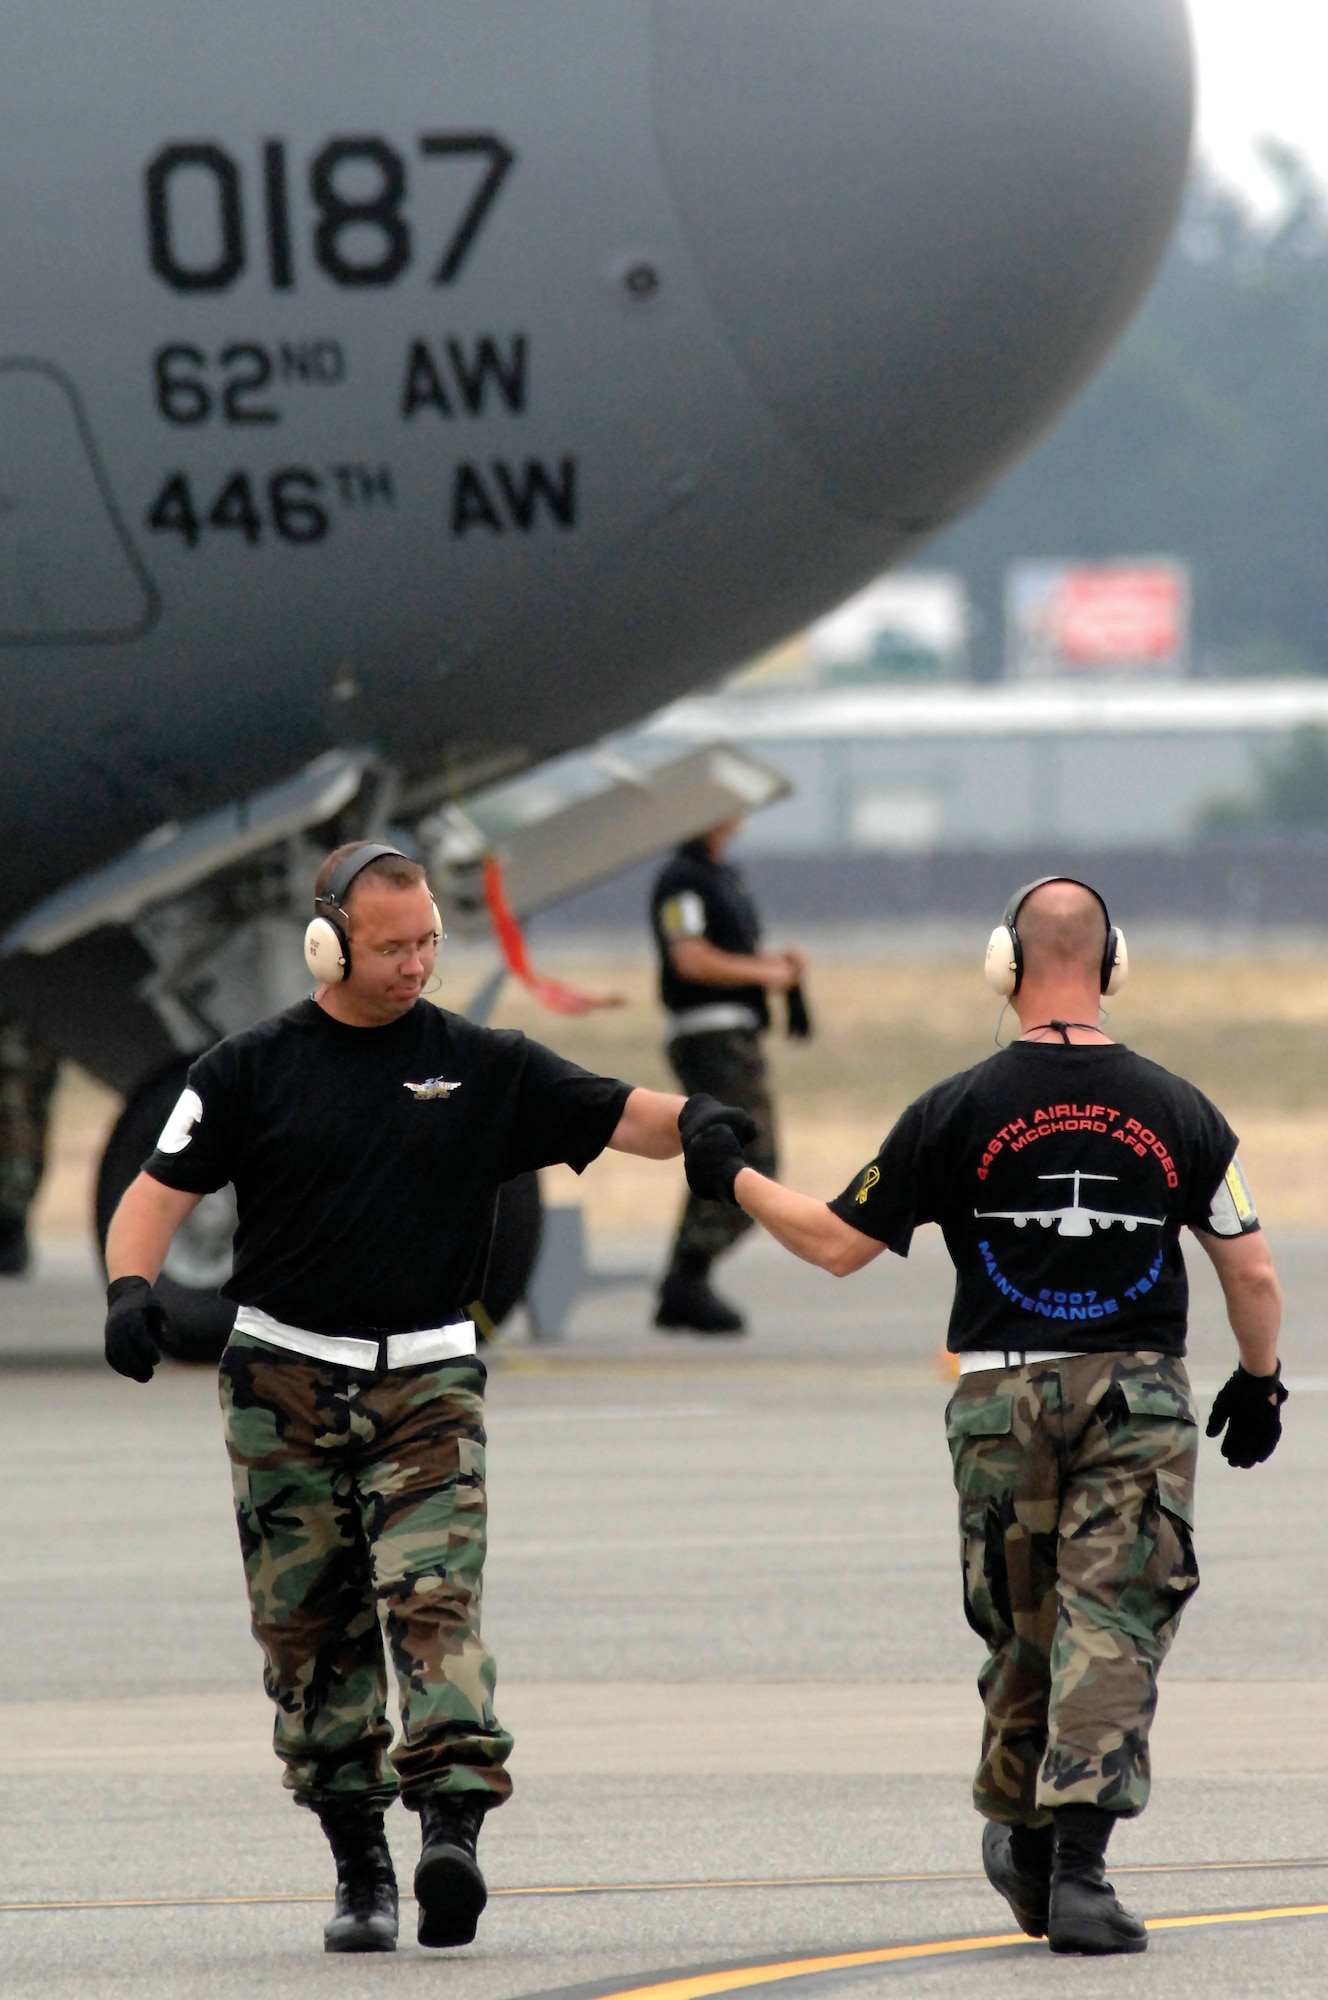 Reservists Tech. Sgt. Burke Stott, left, and Master. Sgt. Kevin Smith, 446th Airlift Wing maintenance team members from McChord Air Force Base, Wash., greet it other as they cross paths during Rodeo 2007, held July 23-27 at McChord. (U.S. Air Force photo/Abner Guzman)